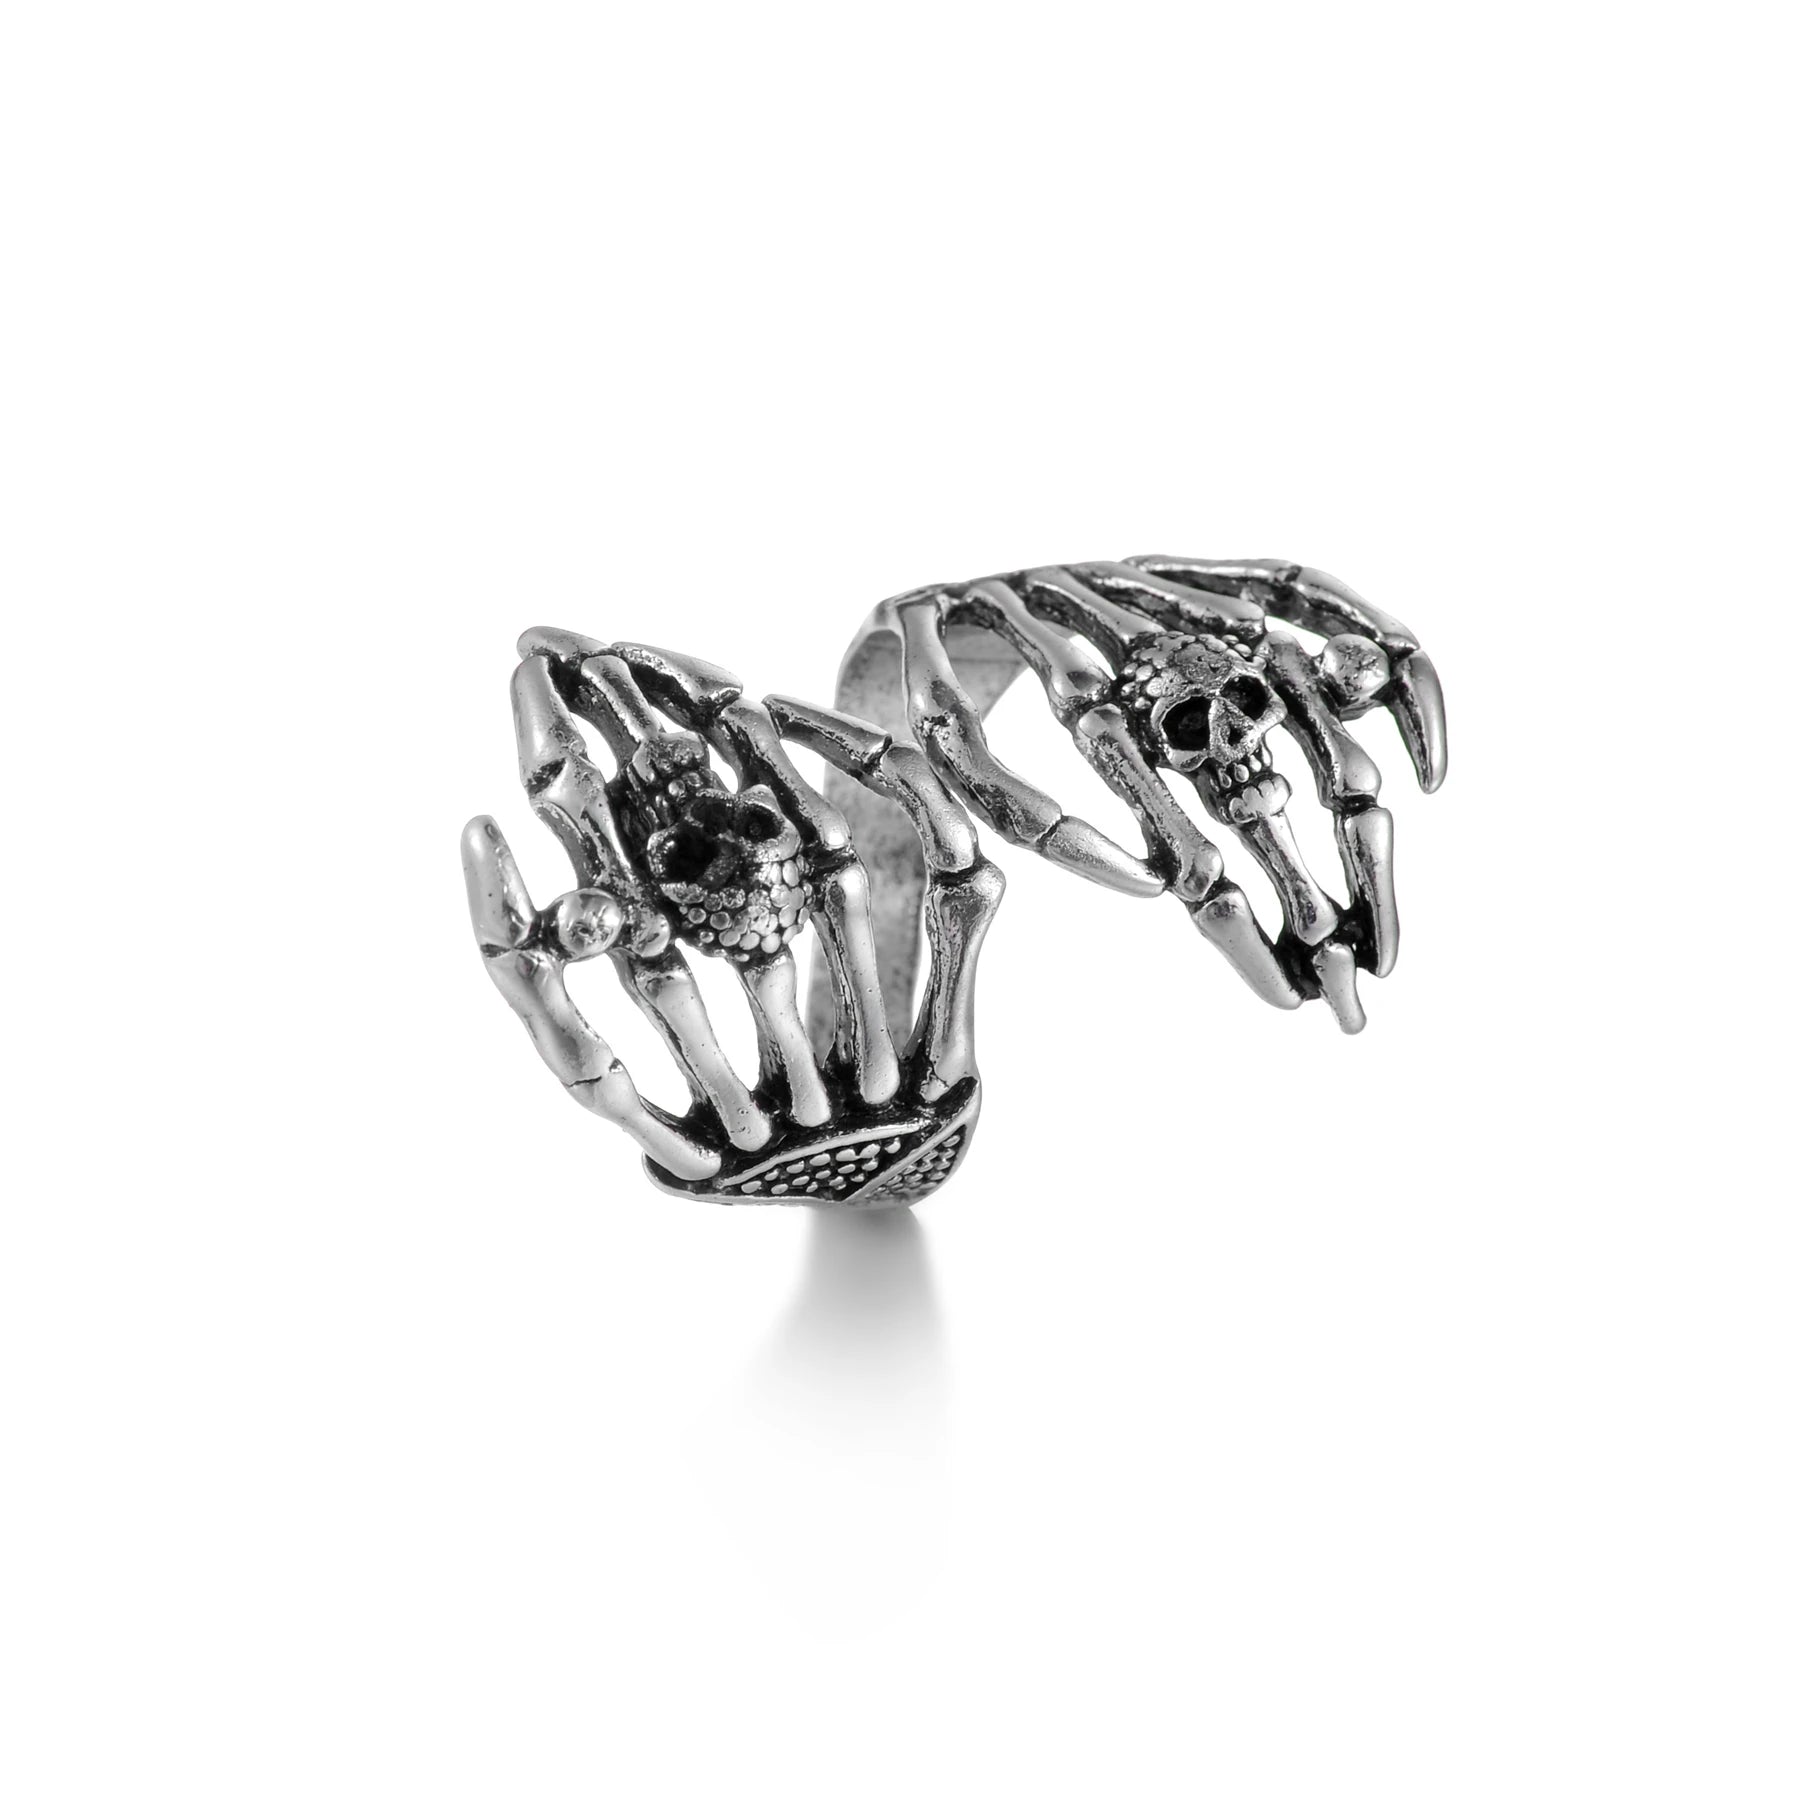 Vleee Vintage Silver Skeleton Hug Ring: Punk Style, Adjustable, Ideal Retro Jewelry Gift for Men and Women. Dropshipping available.